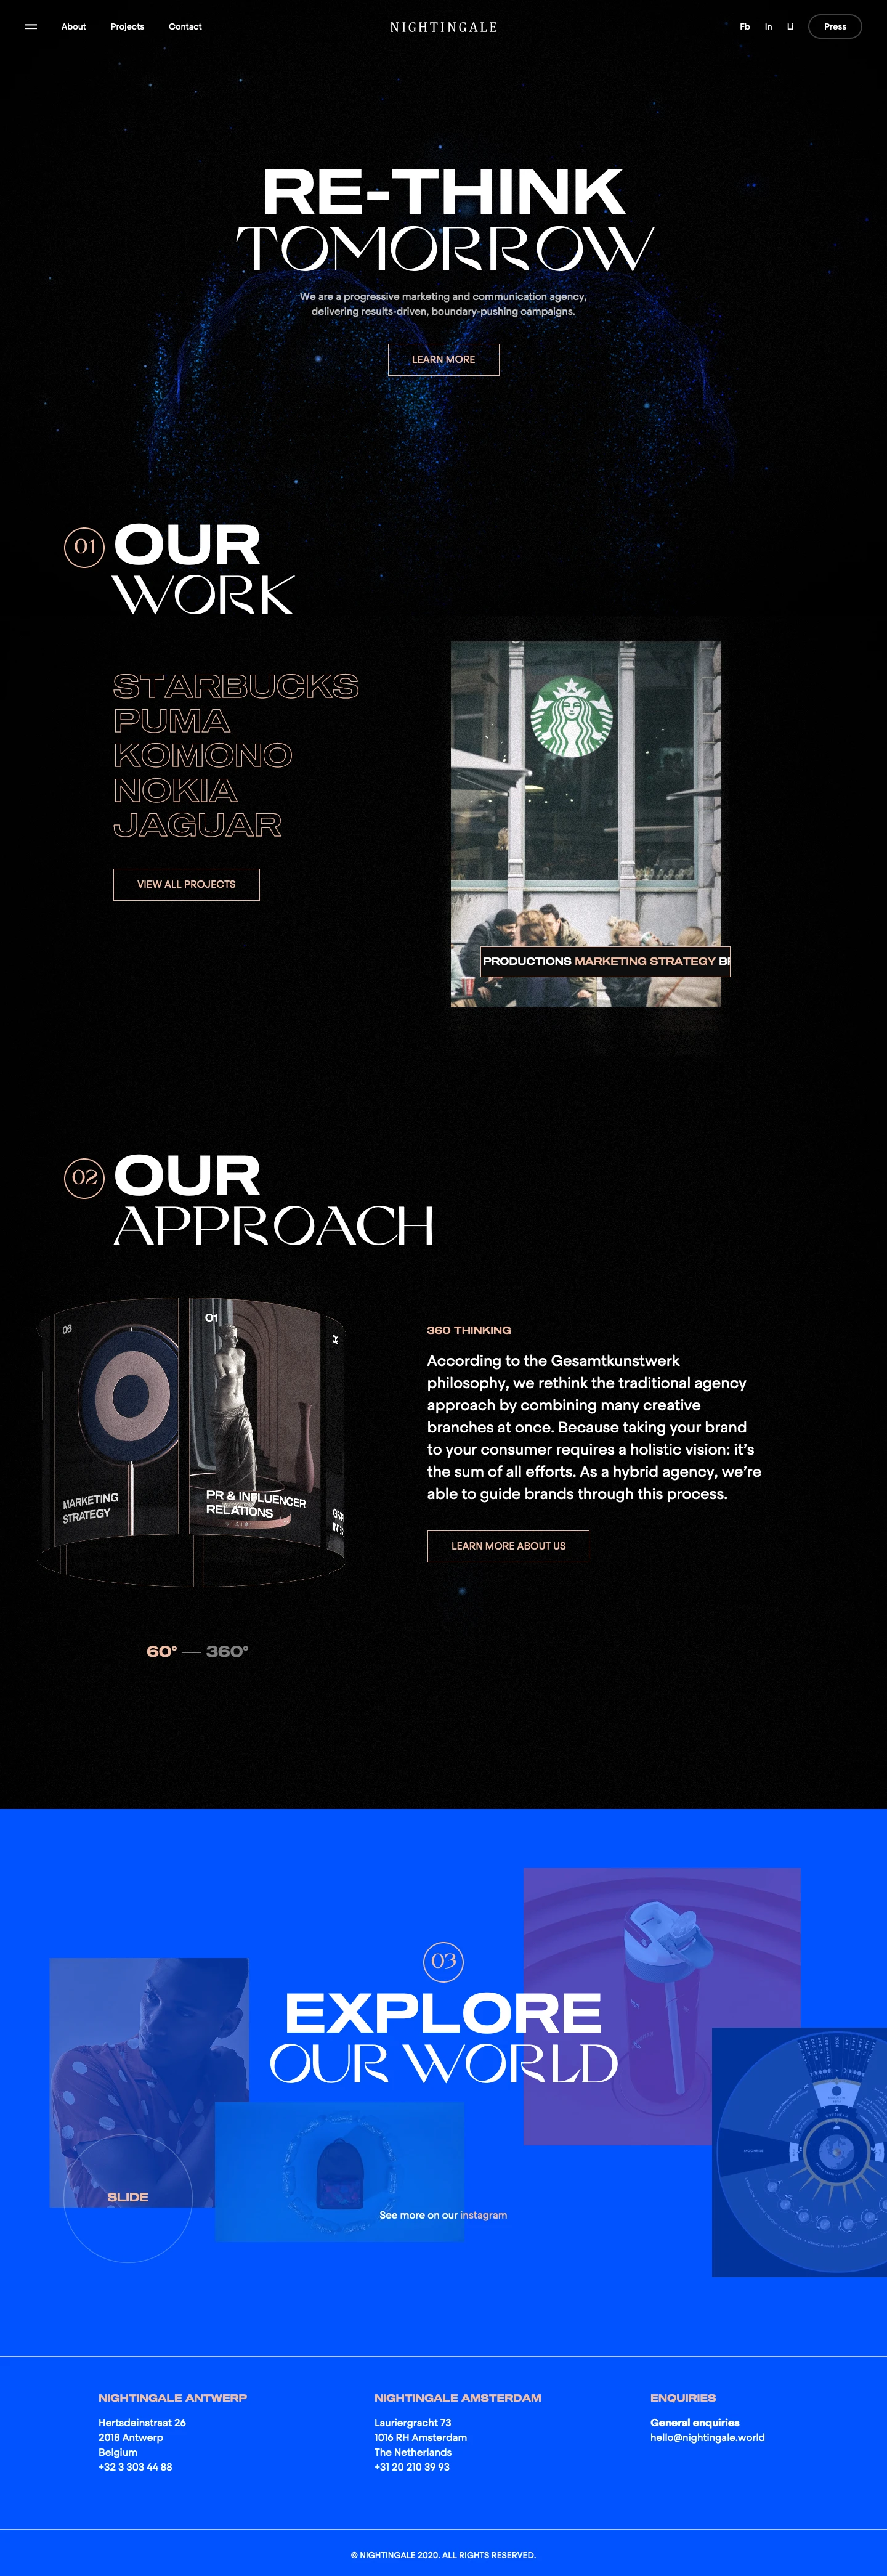 Nightingale Landing Page Example: A progressive marketing and communication agency based in the Benelux. Combining innovation, aesthetics and relevance in fashion, food, design and tech.